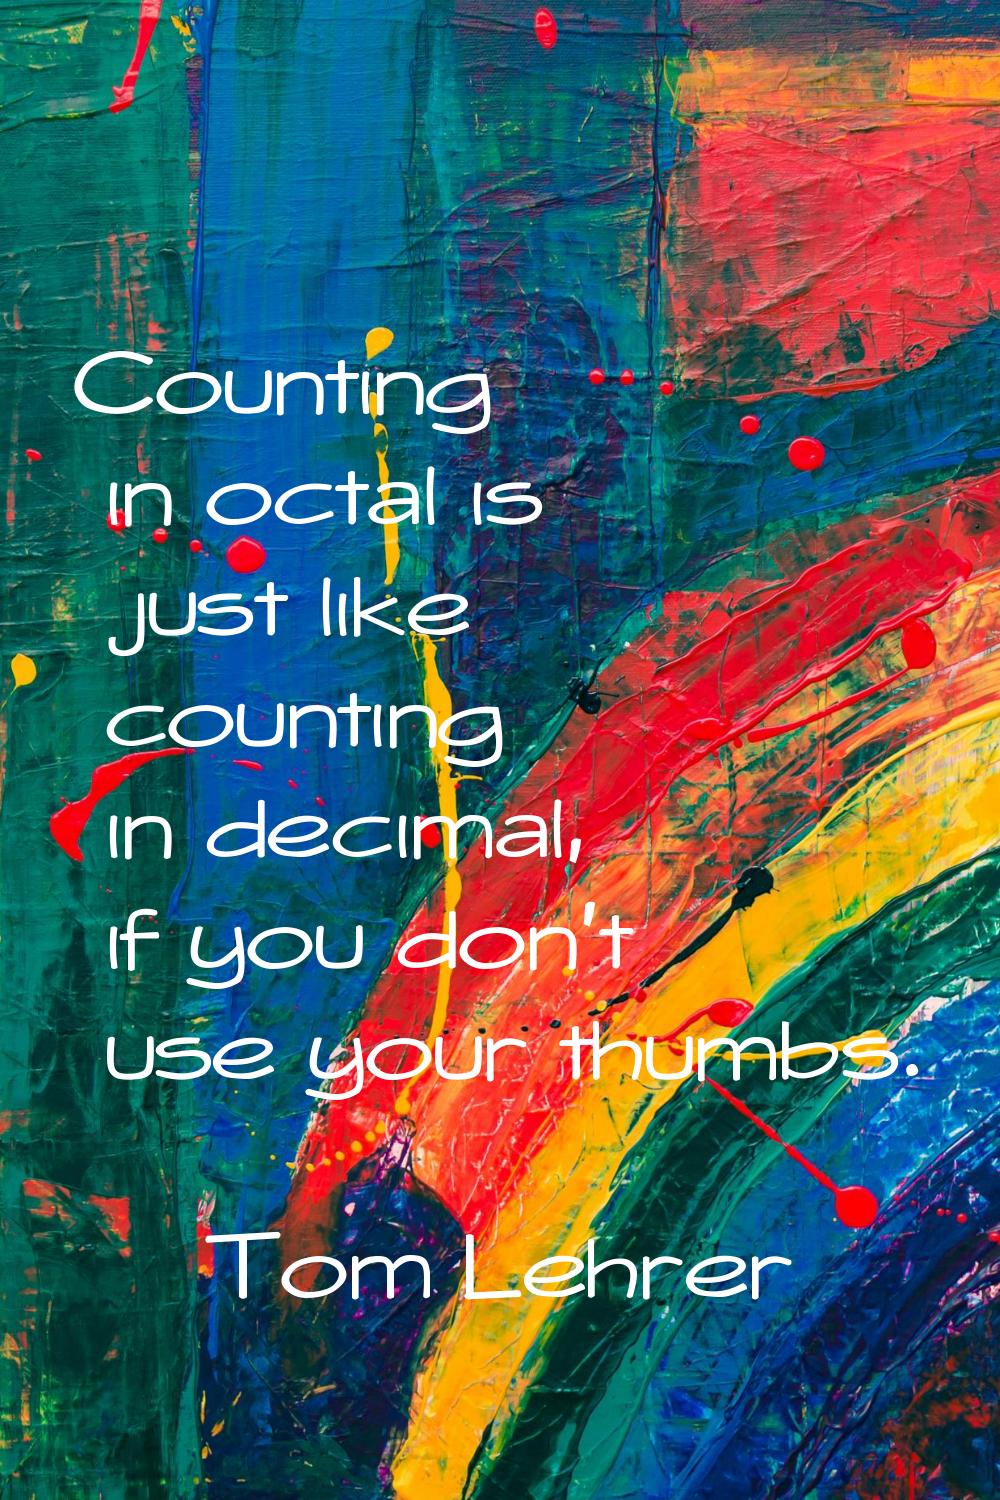 Counting in octal is just like counting in decimal, if you don't use your thumbs.